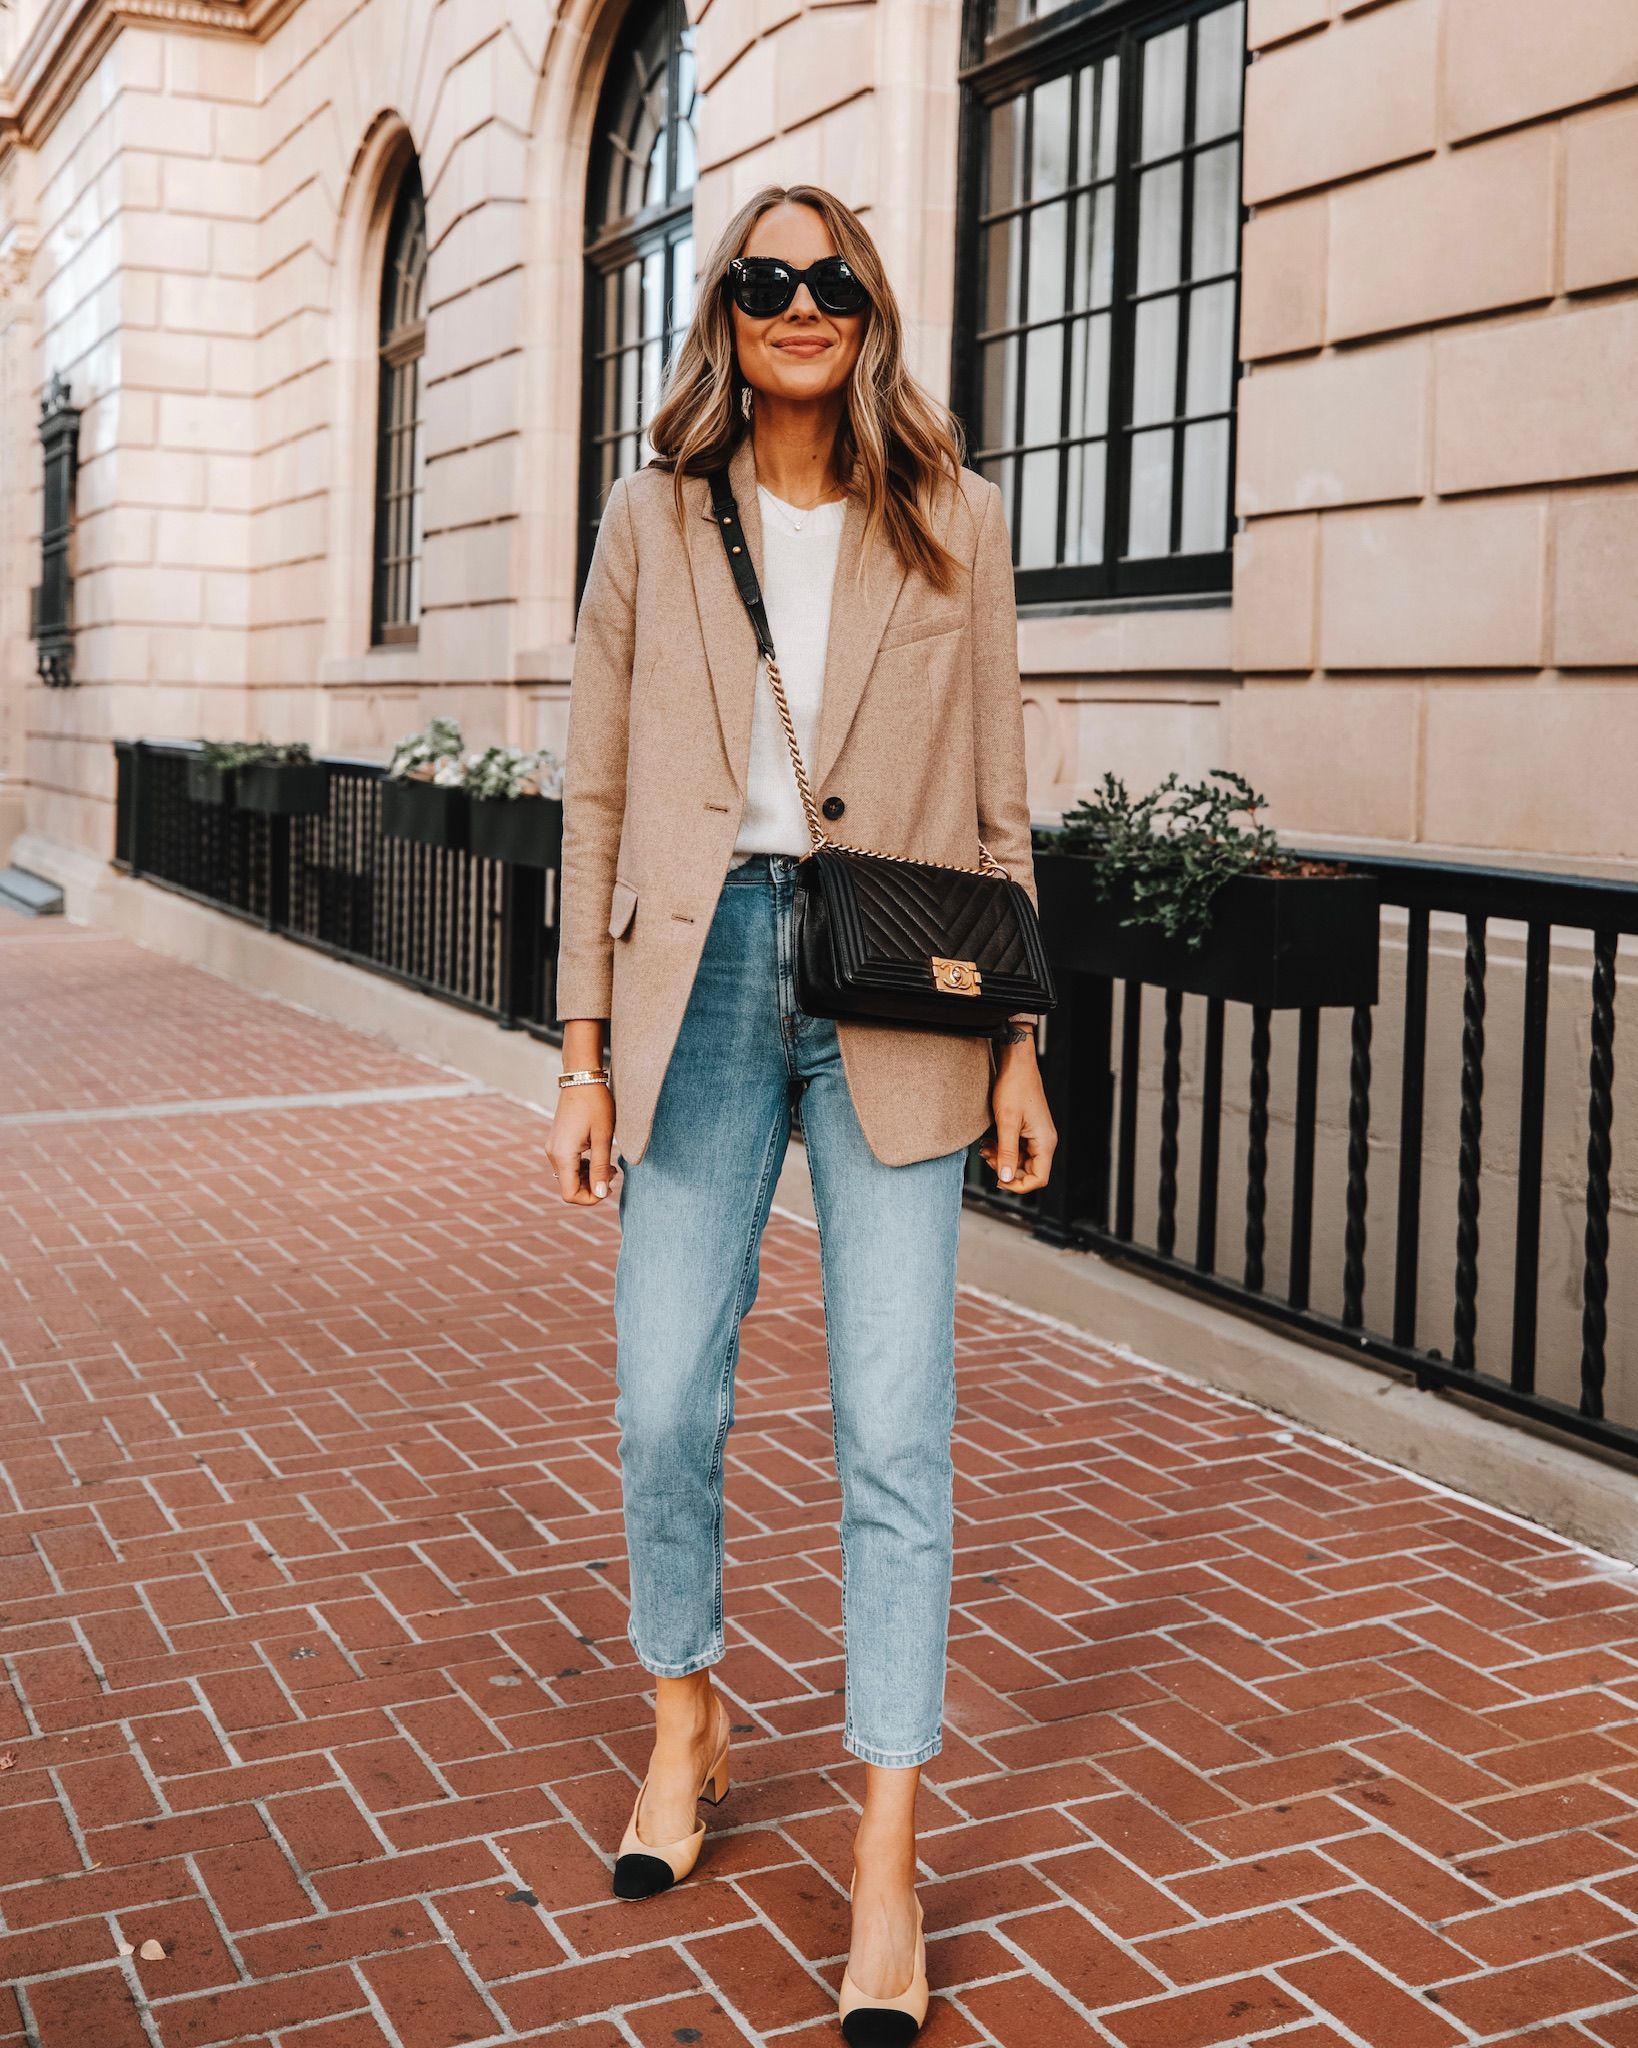 Top 15 Tan Blazer Outfit Ideas for Ladies: Style Guide